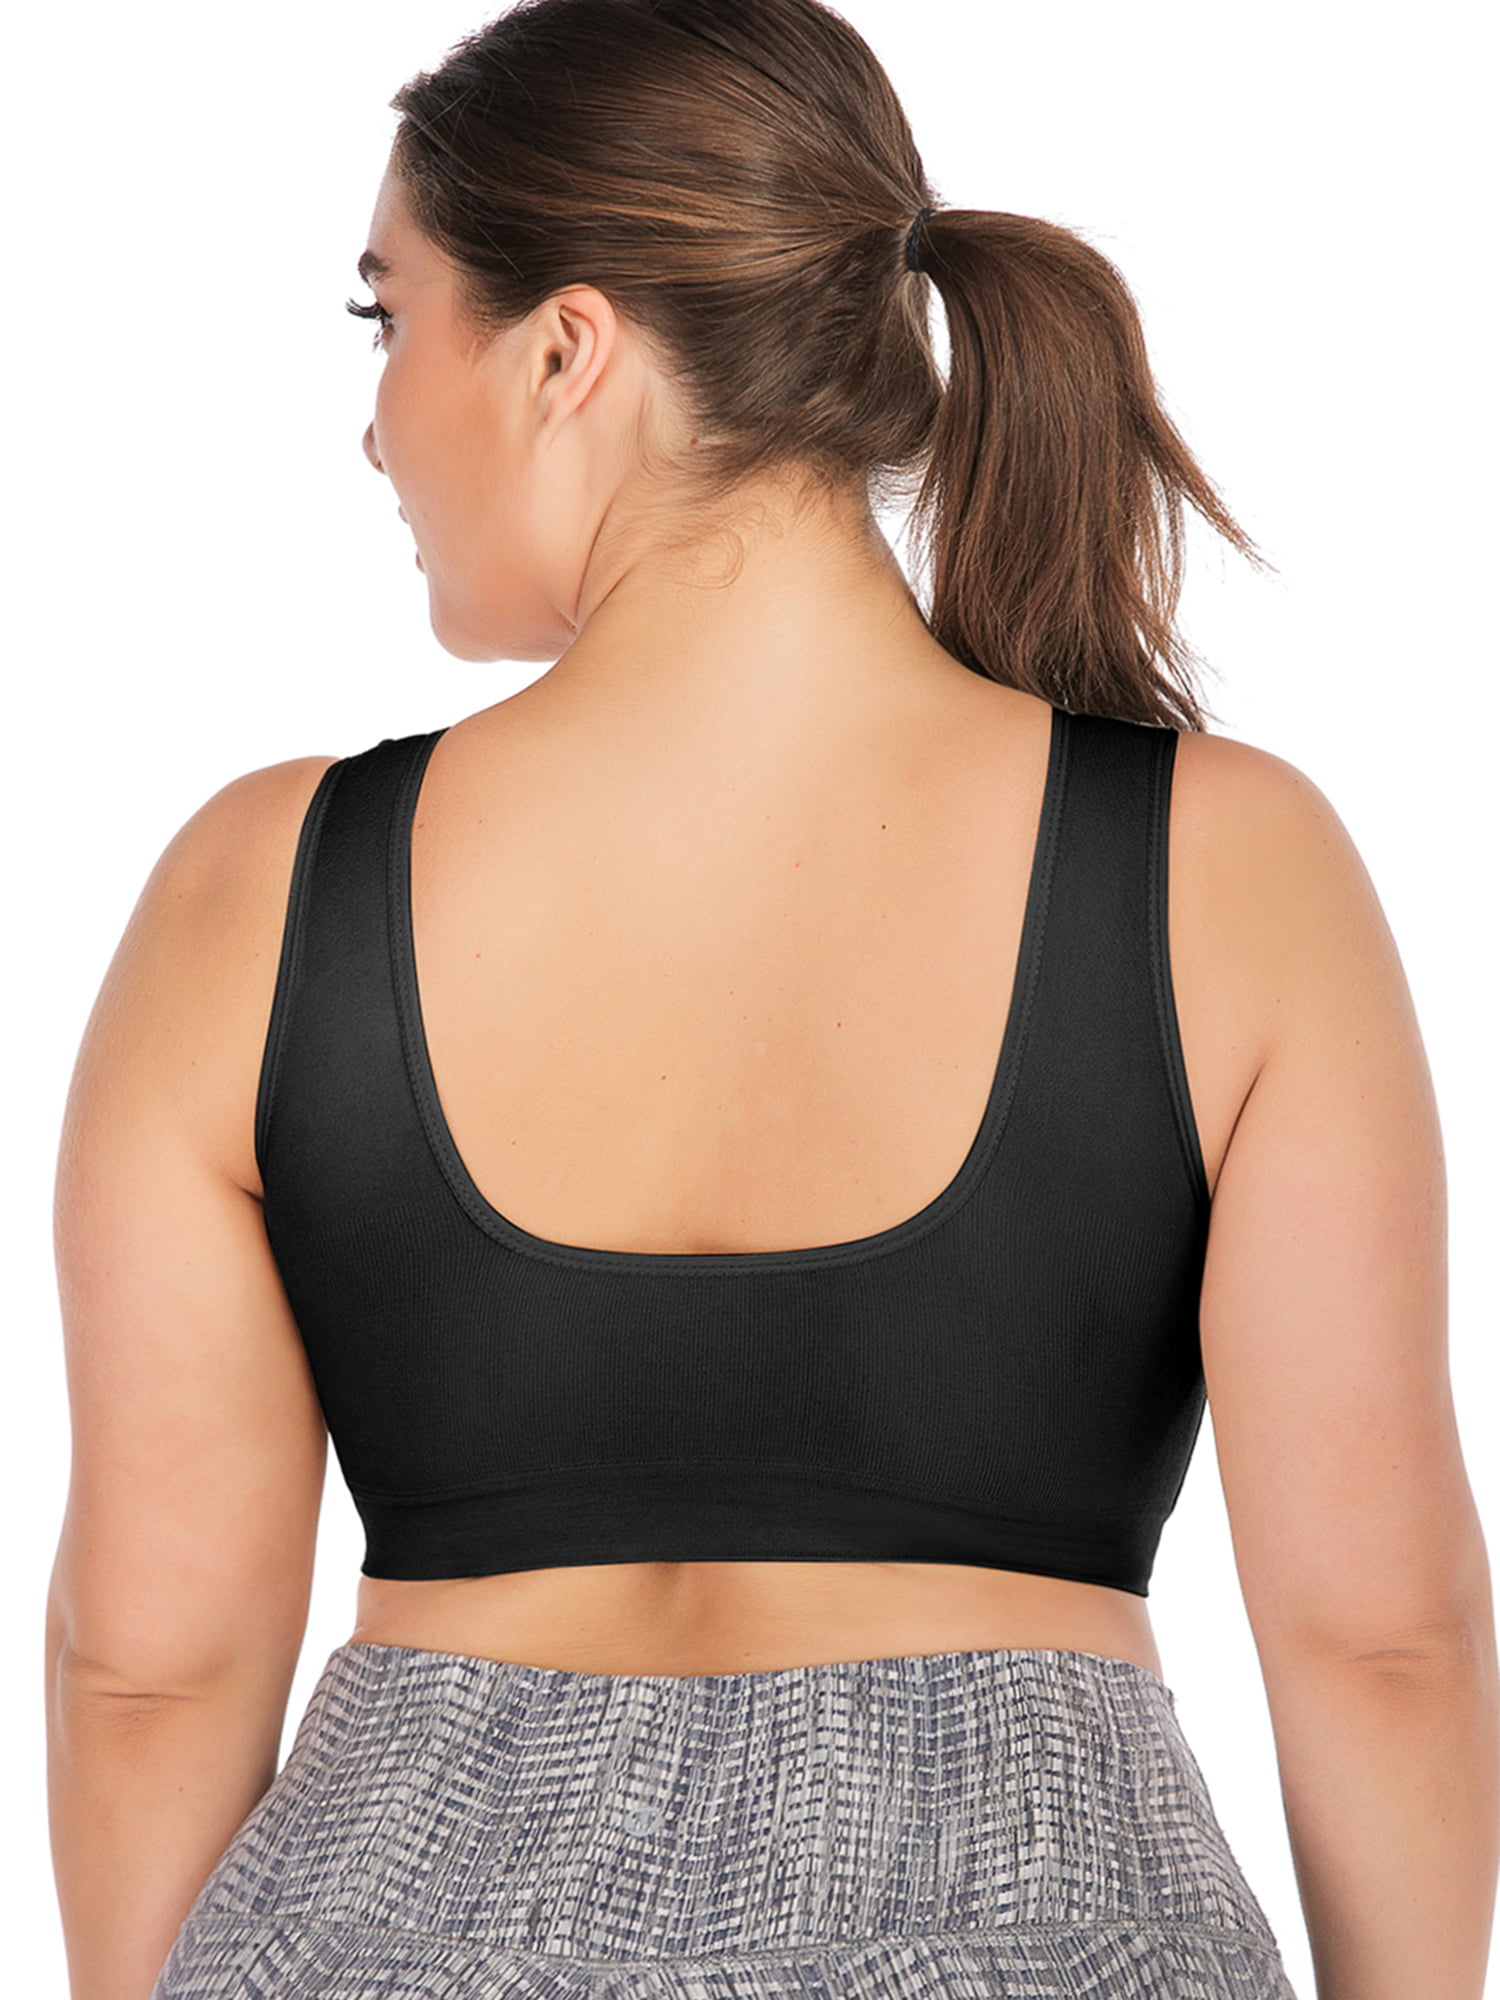 Beonlema Women's Plus Size Sports Bra Soft And Comfortable Elastic